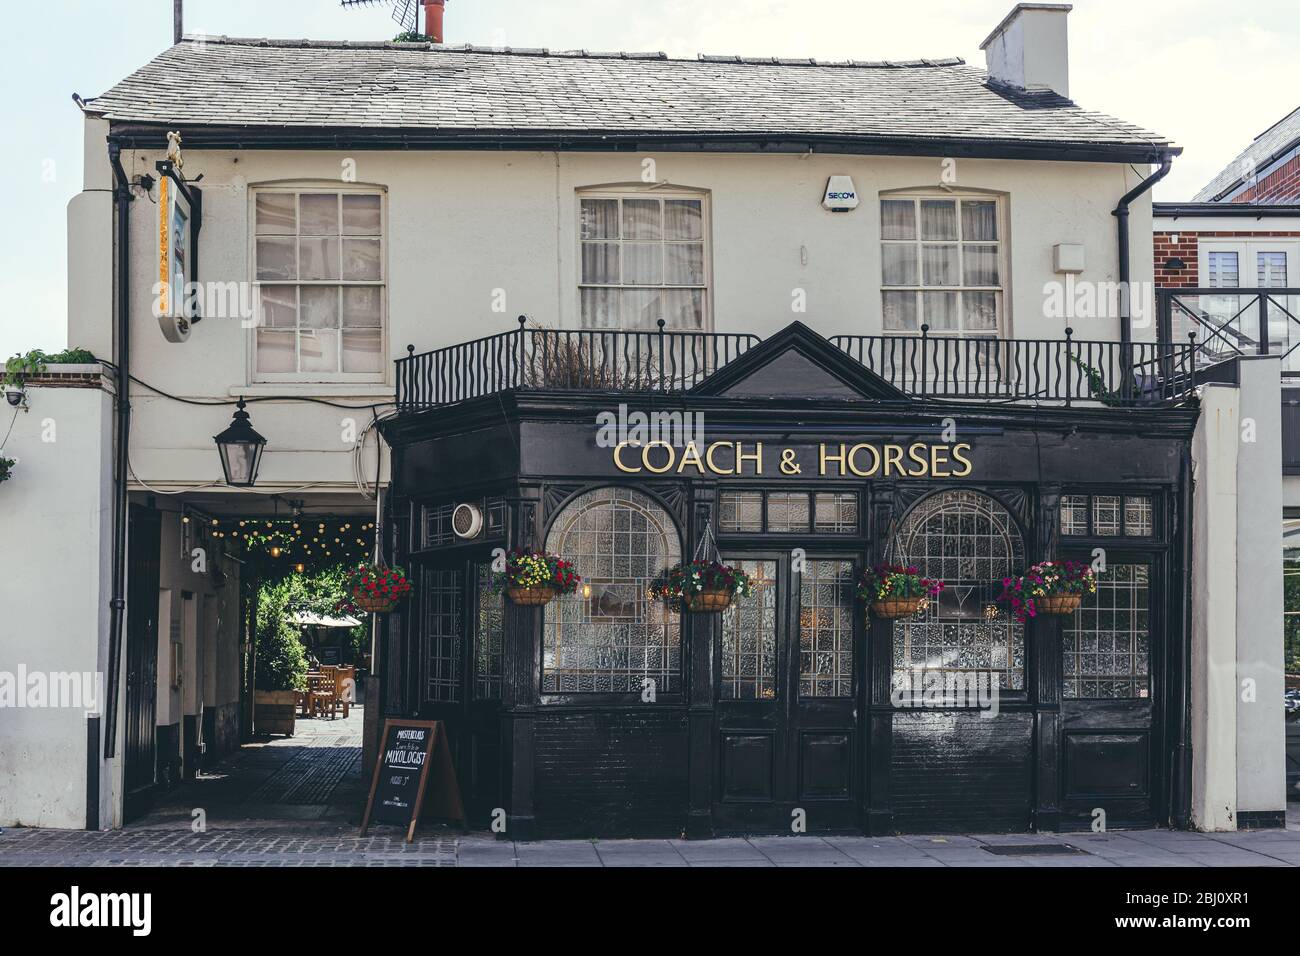 London/UK-1/08/18: The Coach and Horses Pub, local pub on Barnes High Street in London Borough of Richmond upon Thames. Pubs are a social drinking est Stock Photo